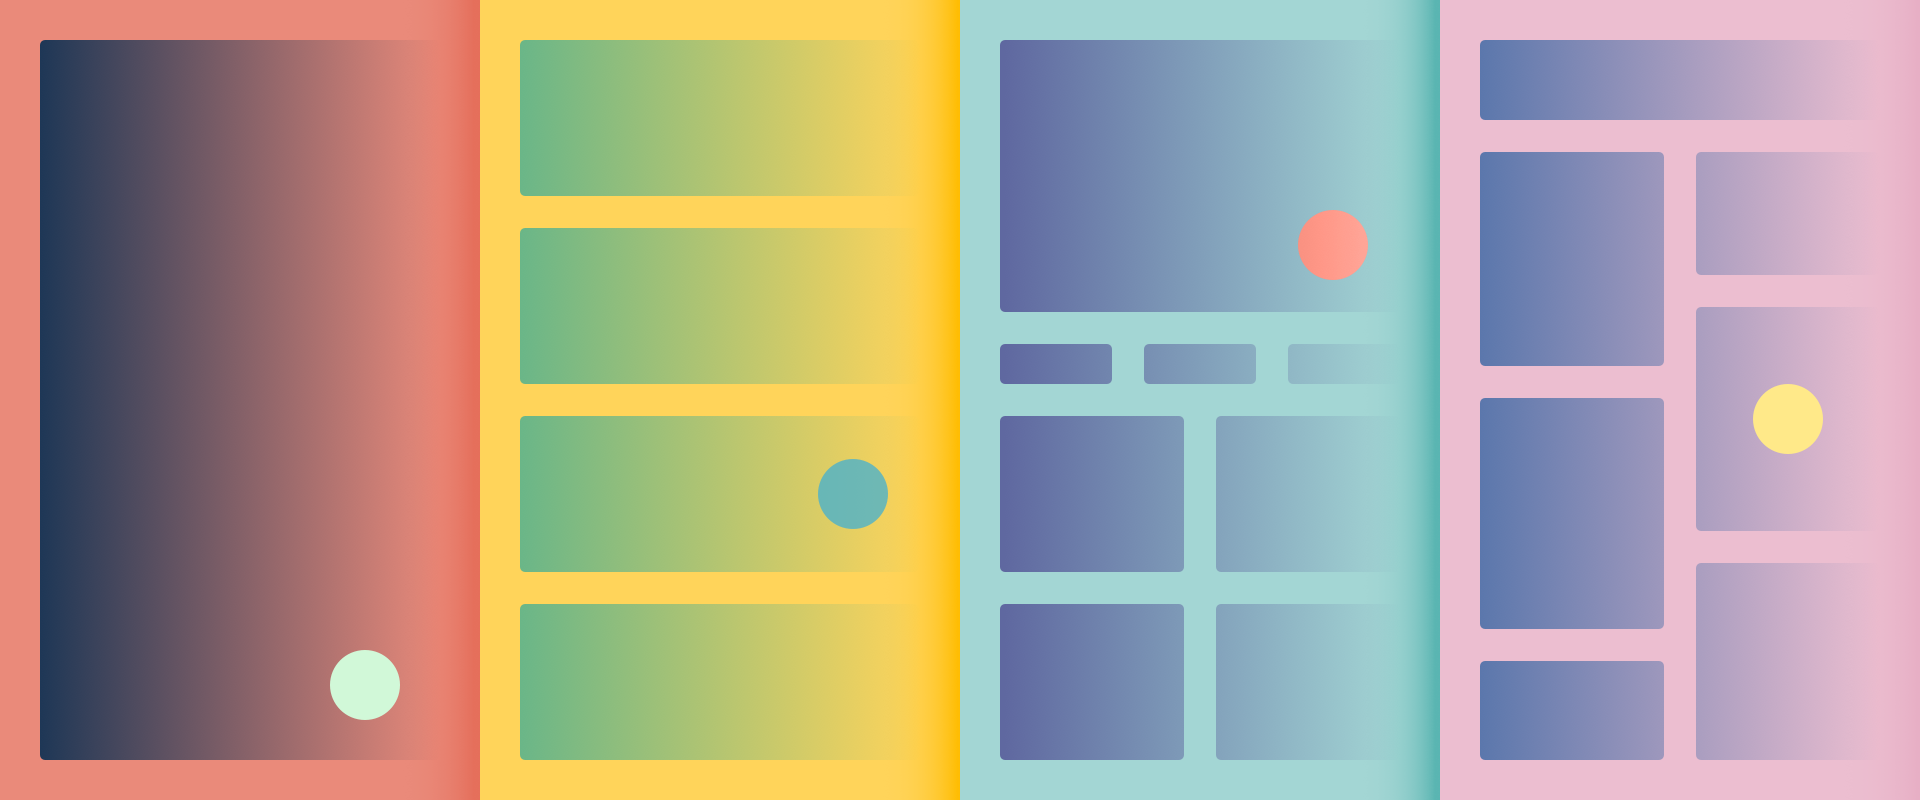 Mobile Layouts & Grids